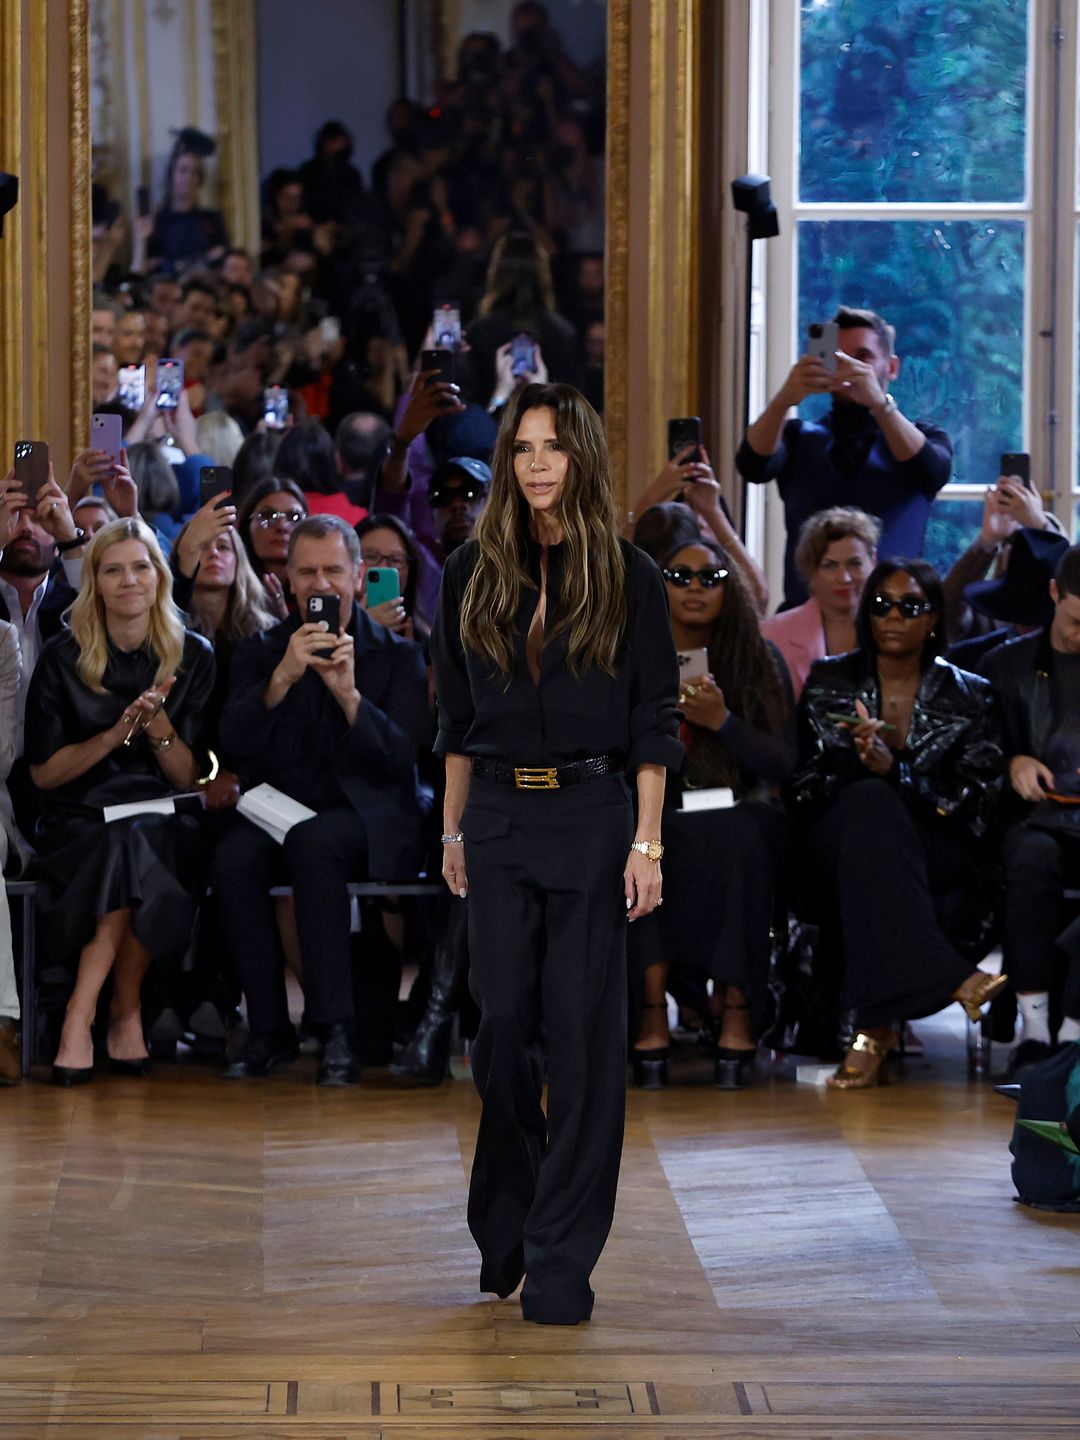 PARIS, FRANCE - SEPTEMBER 29: (EDITORIAL USE ONLY - For Non-Editorial use please seek approval from Fashion House) Fashion designer Victoria Beckham at the runway during the Victoria Beckham Womenswear Spring/Summer 2024 show as part of Paris Fashion Week on September 29, 2023 in Paris, France. (Photo by Estrop/Getty Images)